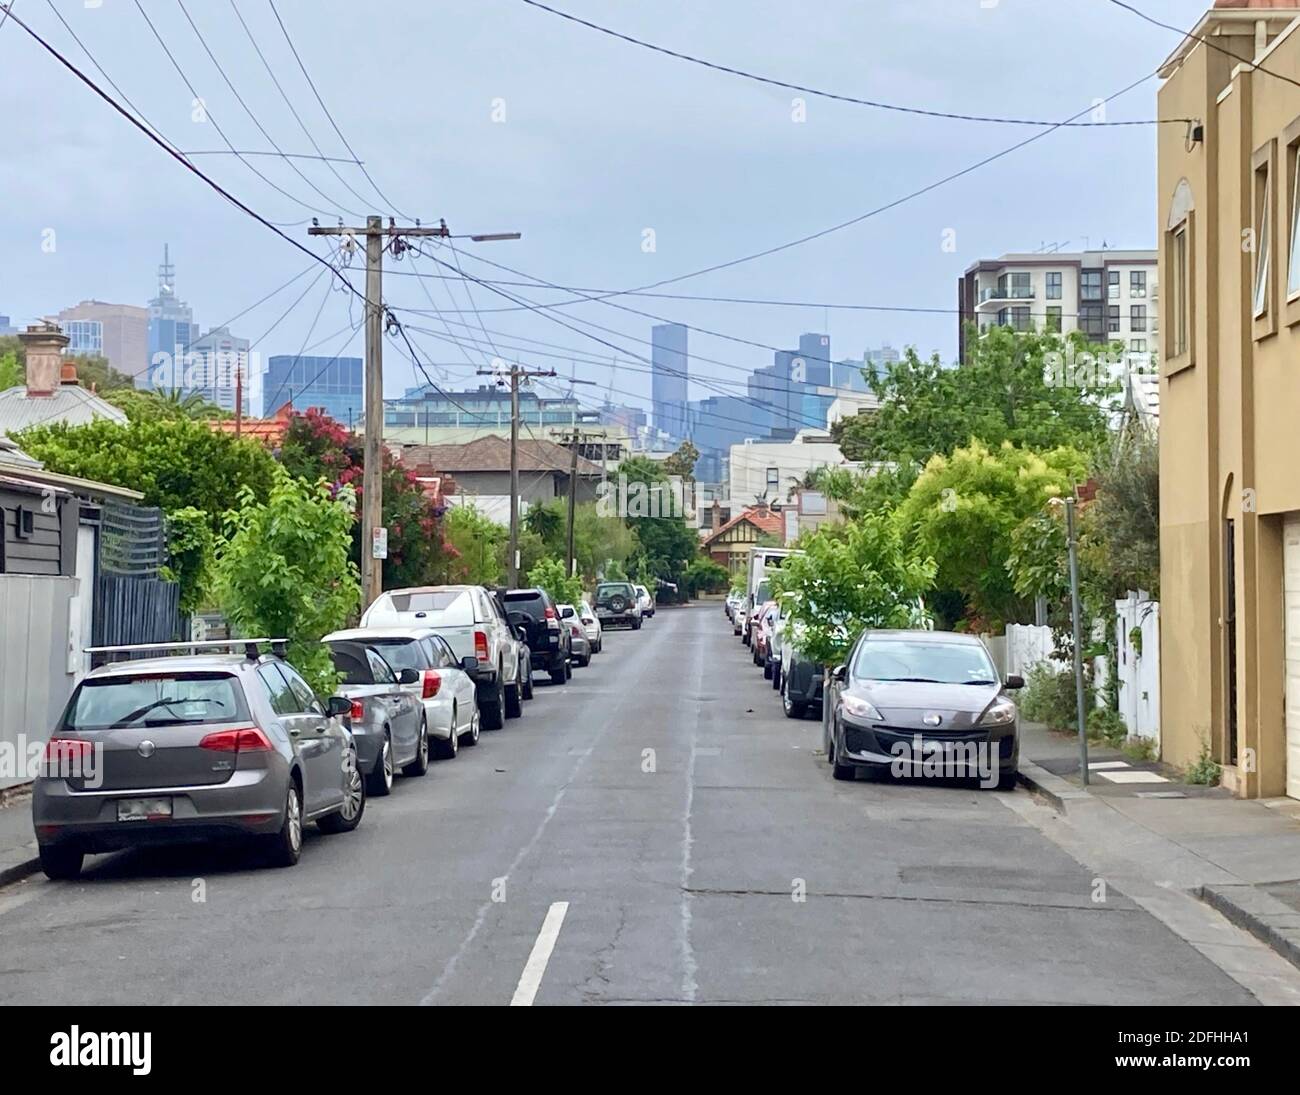 Inner city residential street in Melbourne suburb of Richmond with single family cottages, cars parked both sides and the city CBD in the background Stock Photo